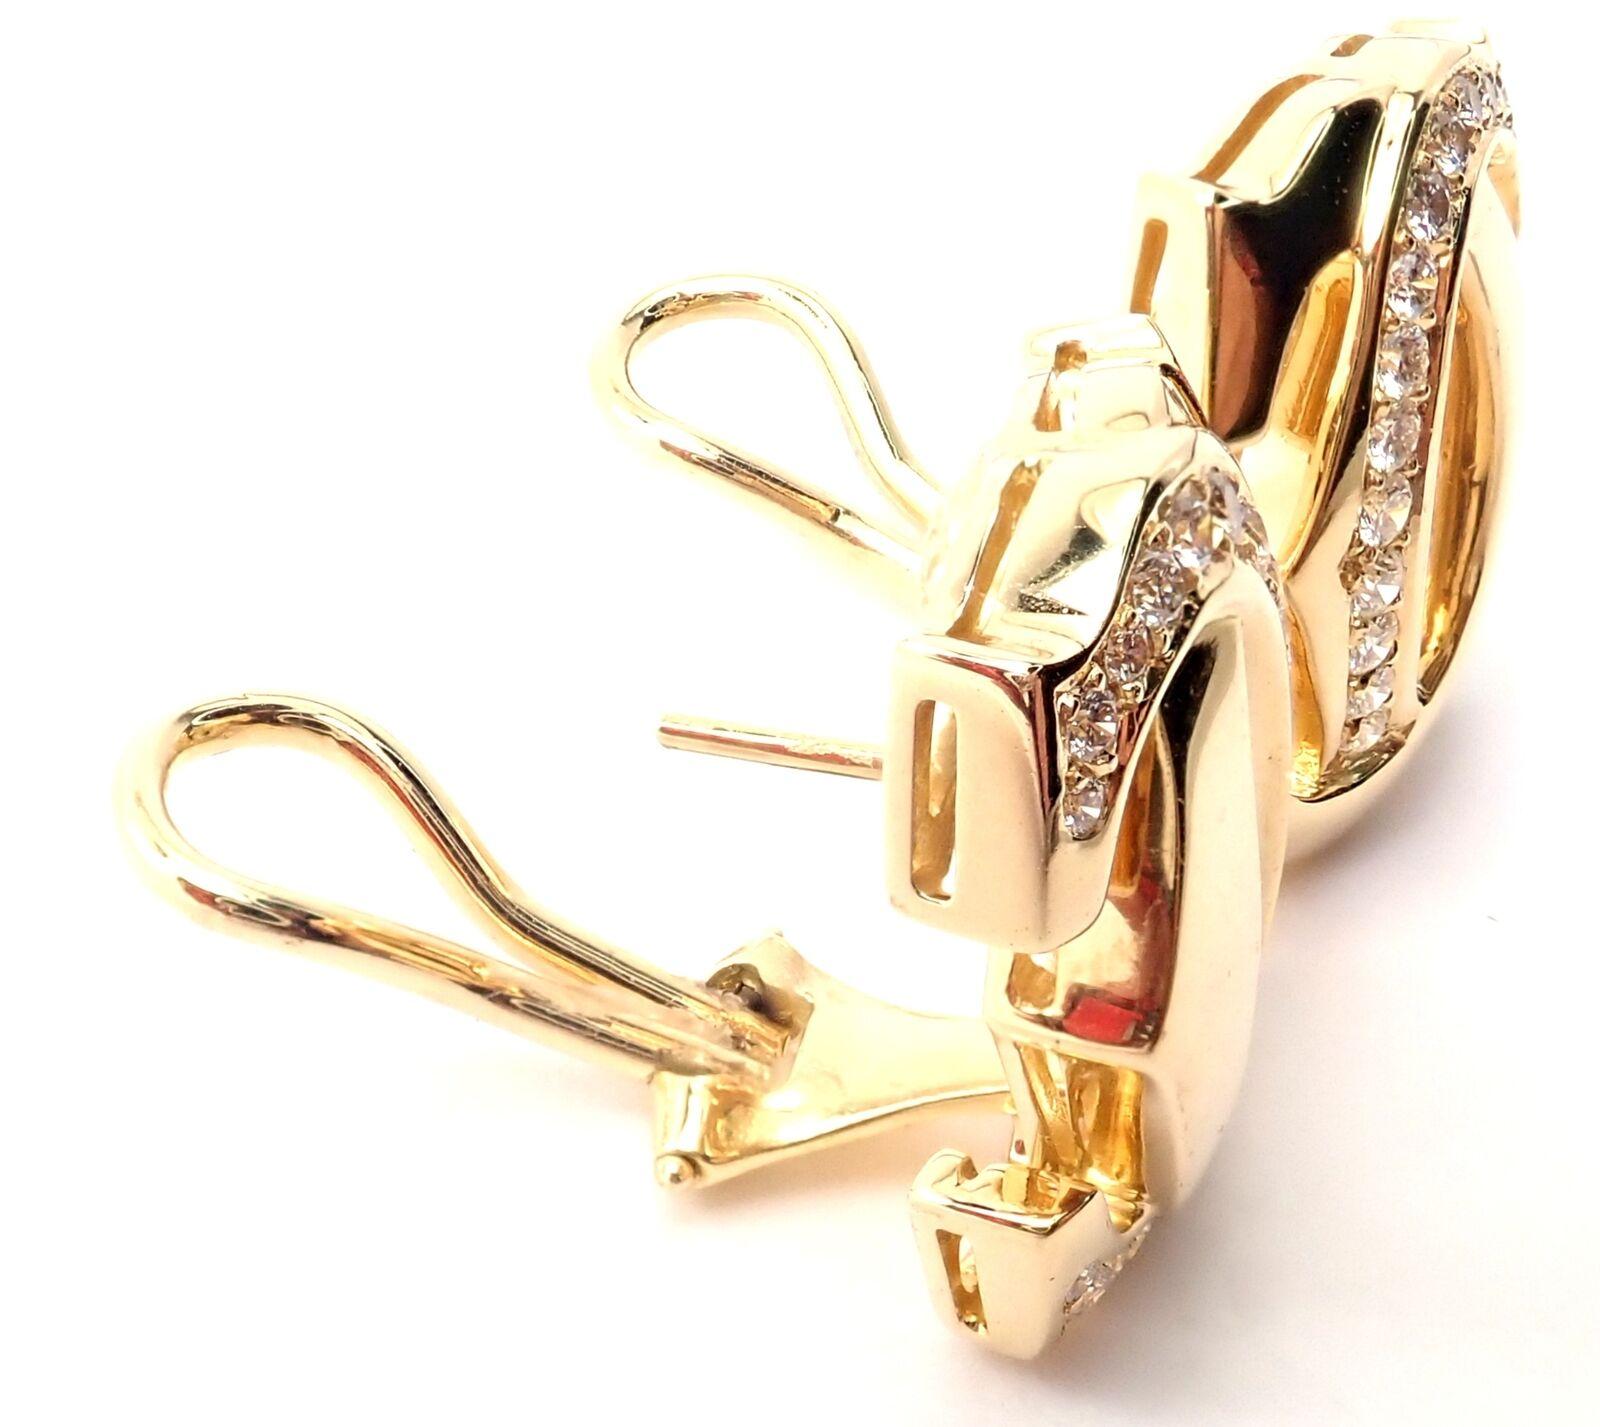 Cartier Penelope Double C Diamond Large Yellow Gold Earrings In Excellent Condition For Sale In Holland, PA